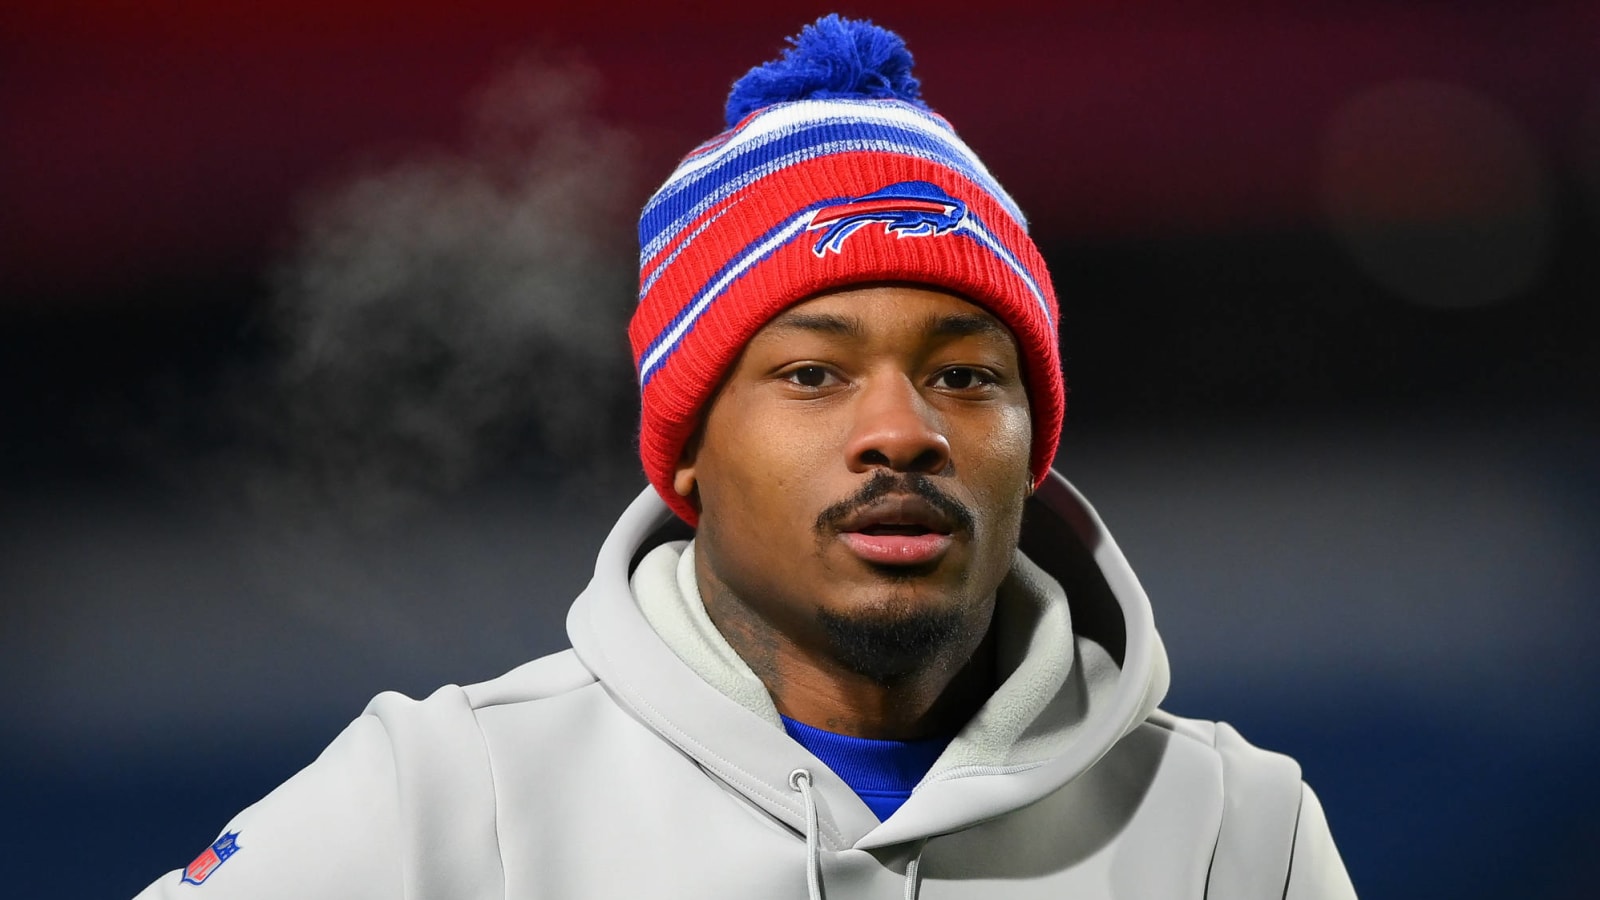 Watch: Bills’ Stefon Diggs takes out fan who entered field during game